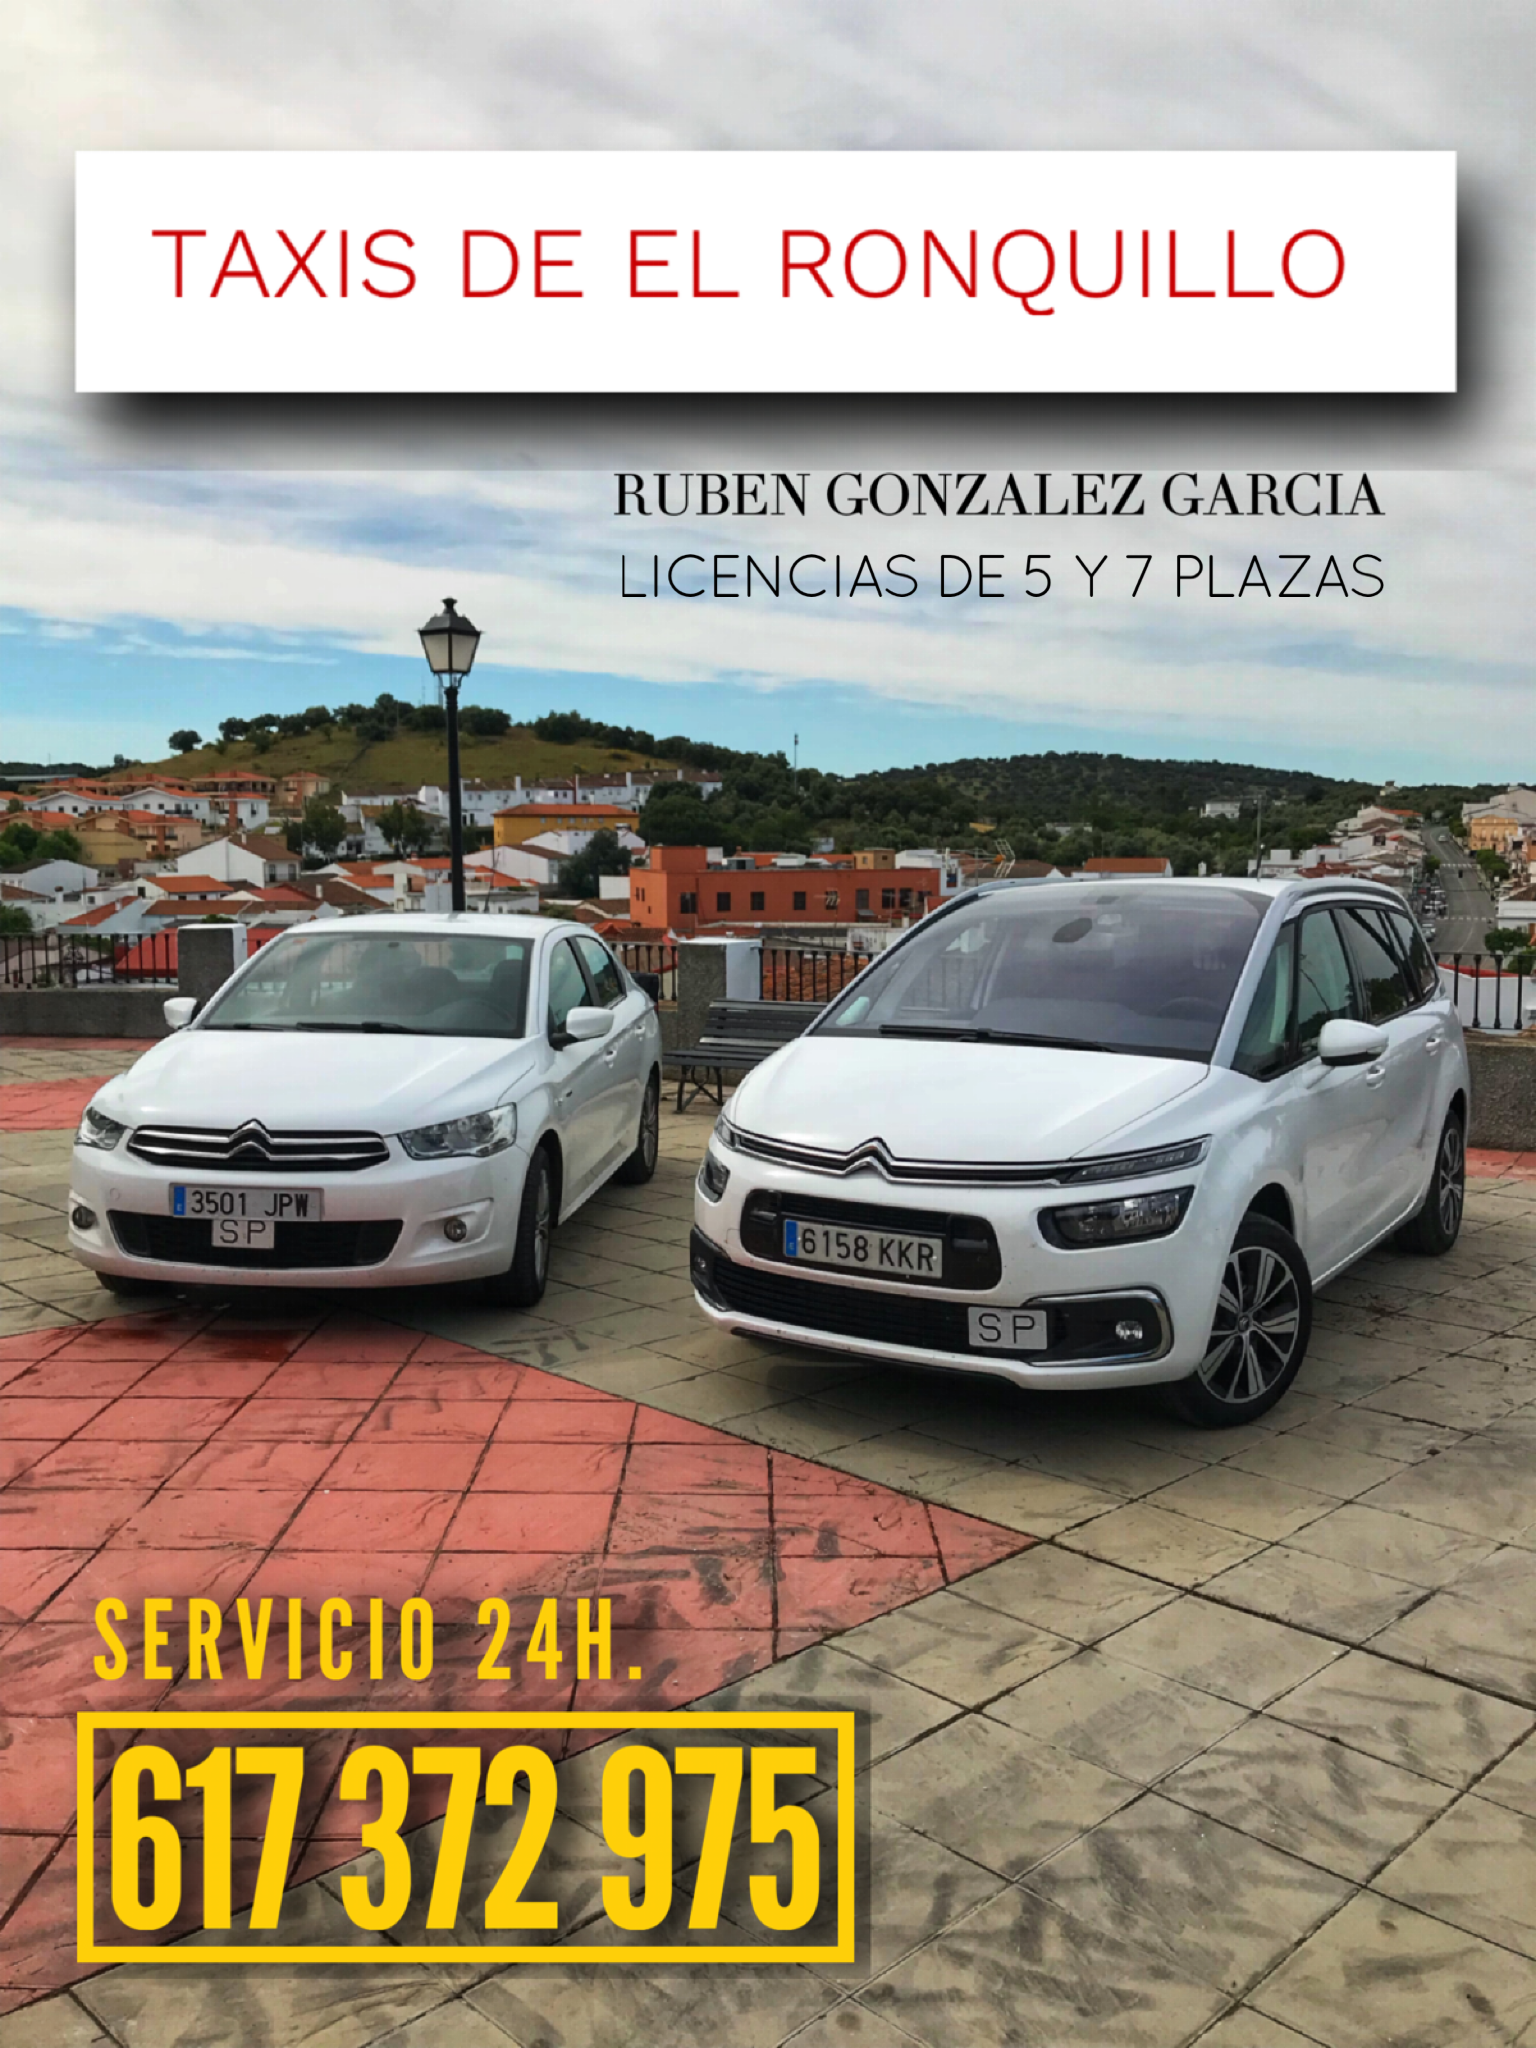 Taxis El Ronquillo